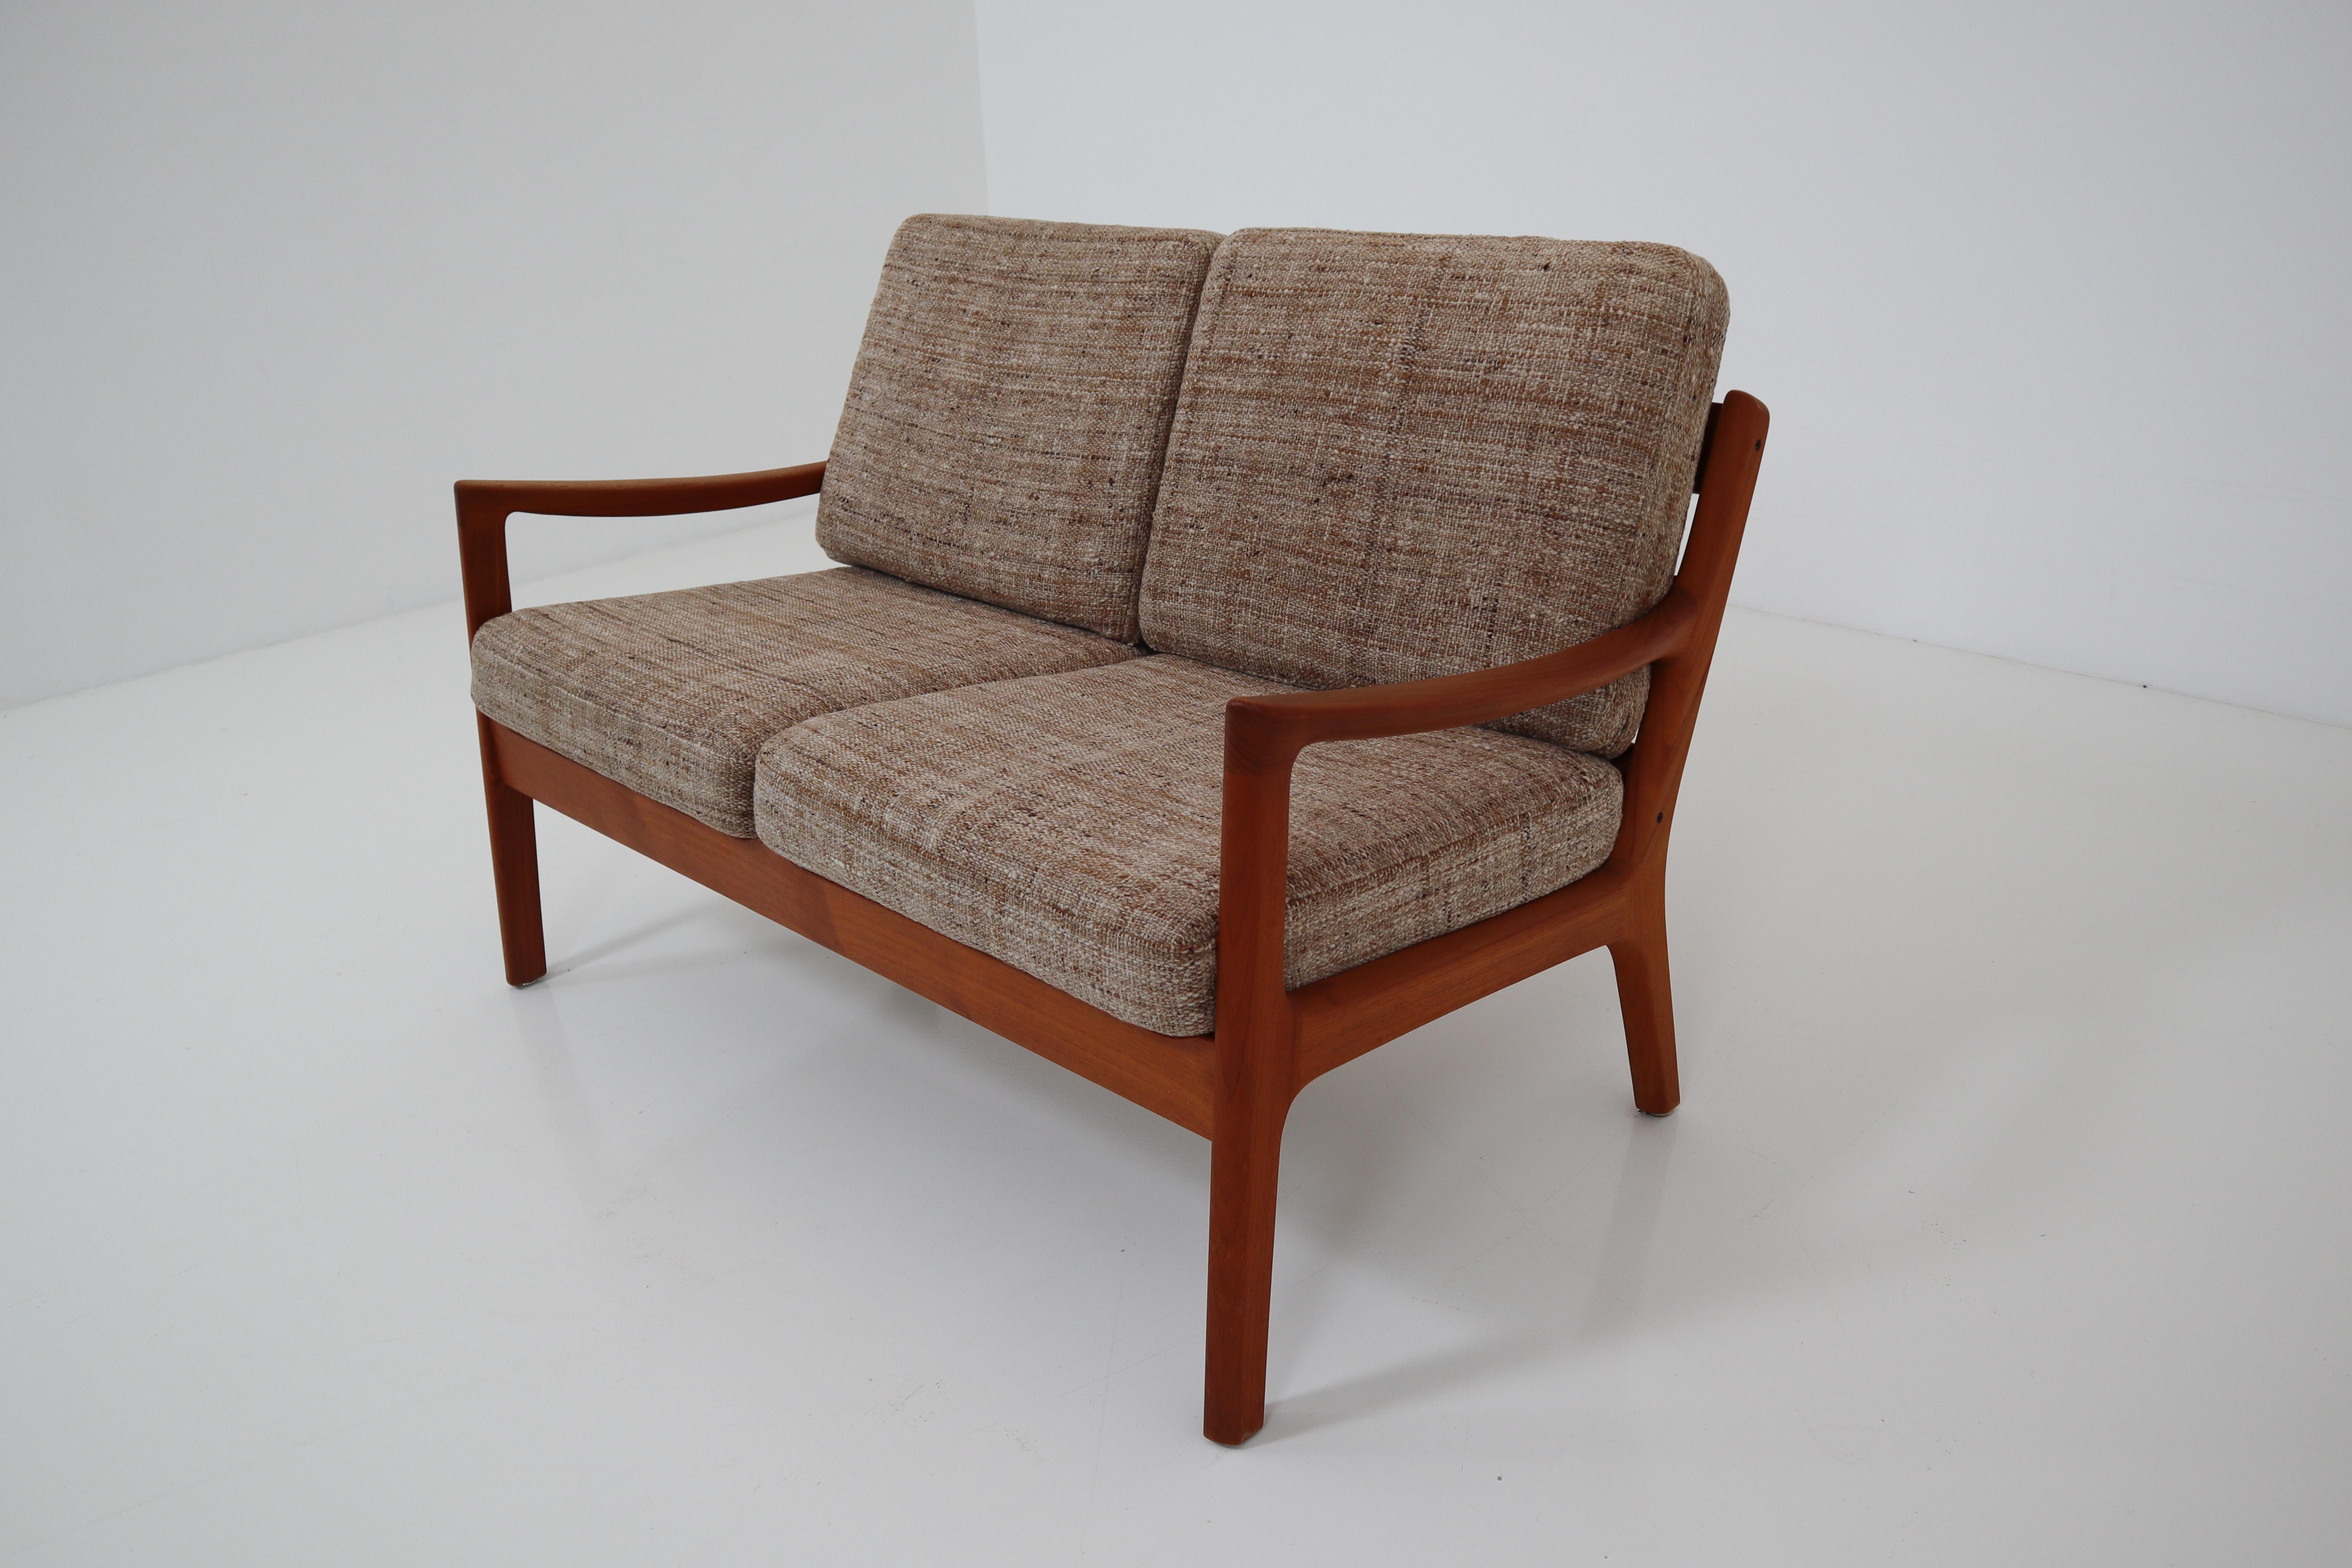 Danish modern senator loveseat by Ole Wanscher for Cado. Sturdy teak frame with loose cushions. Ready to reupholster in the fabric of your choice.